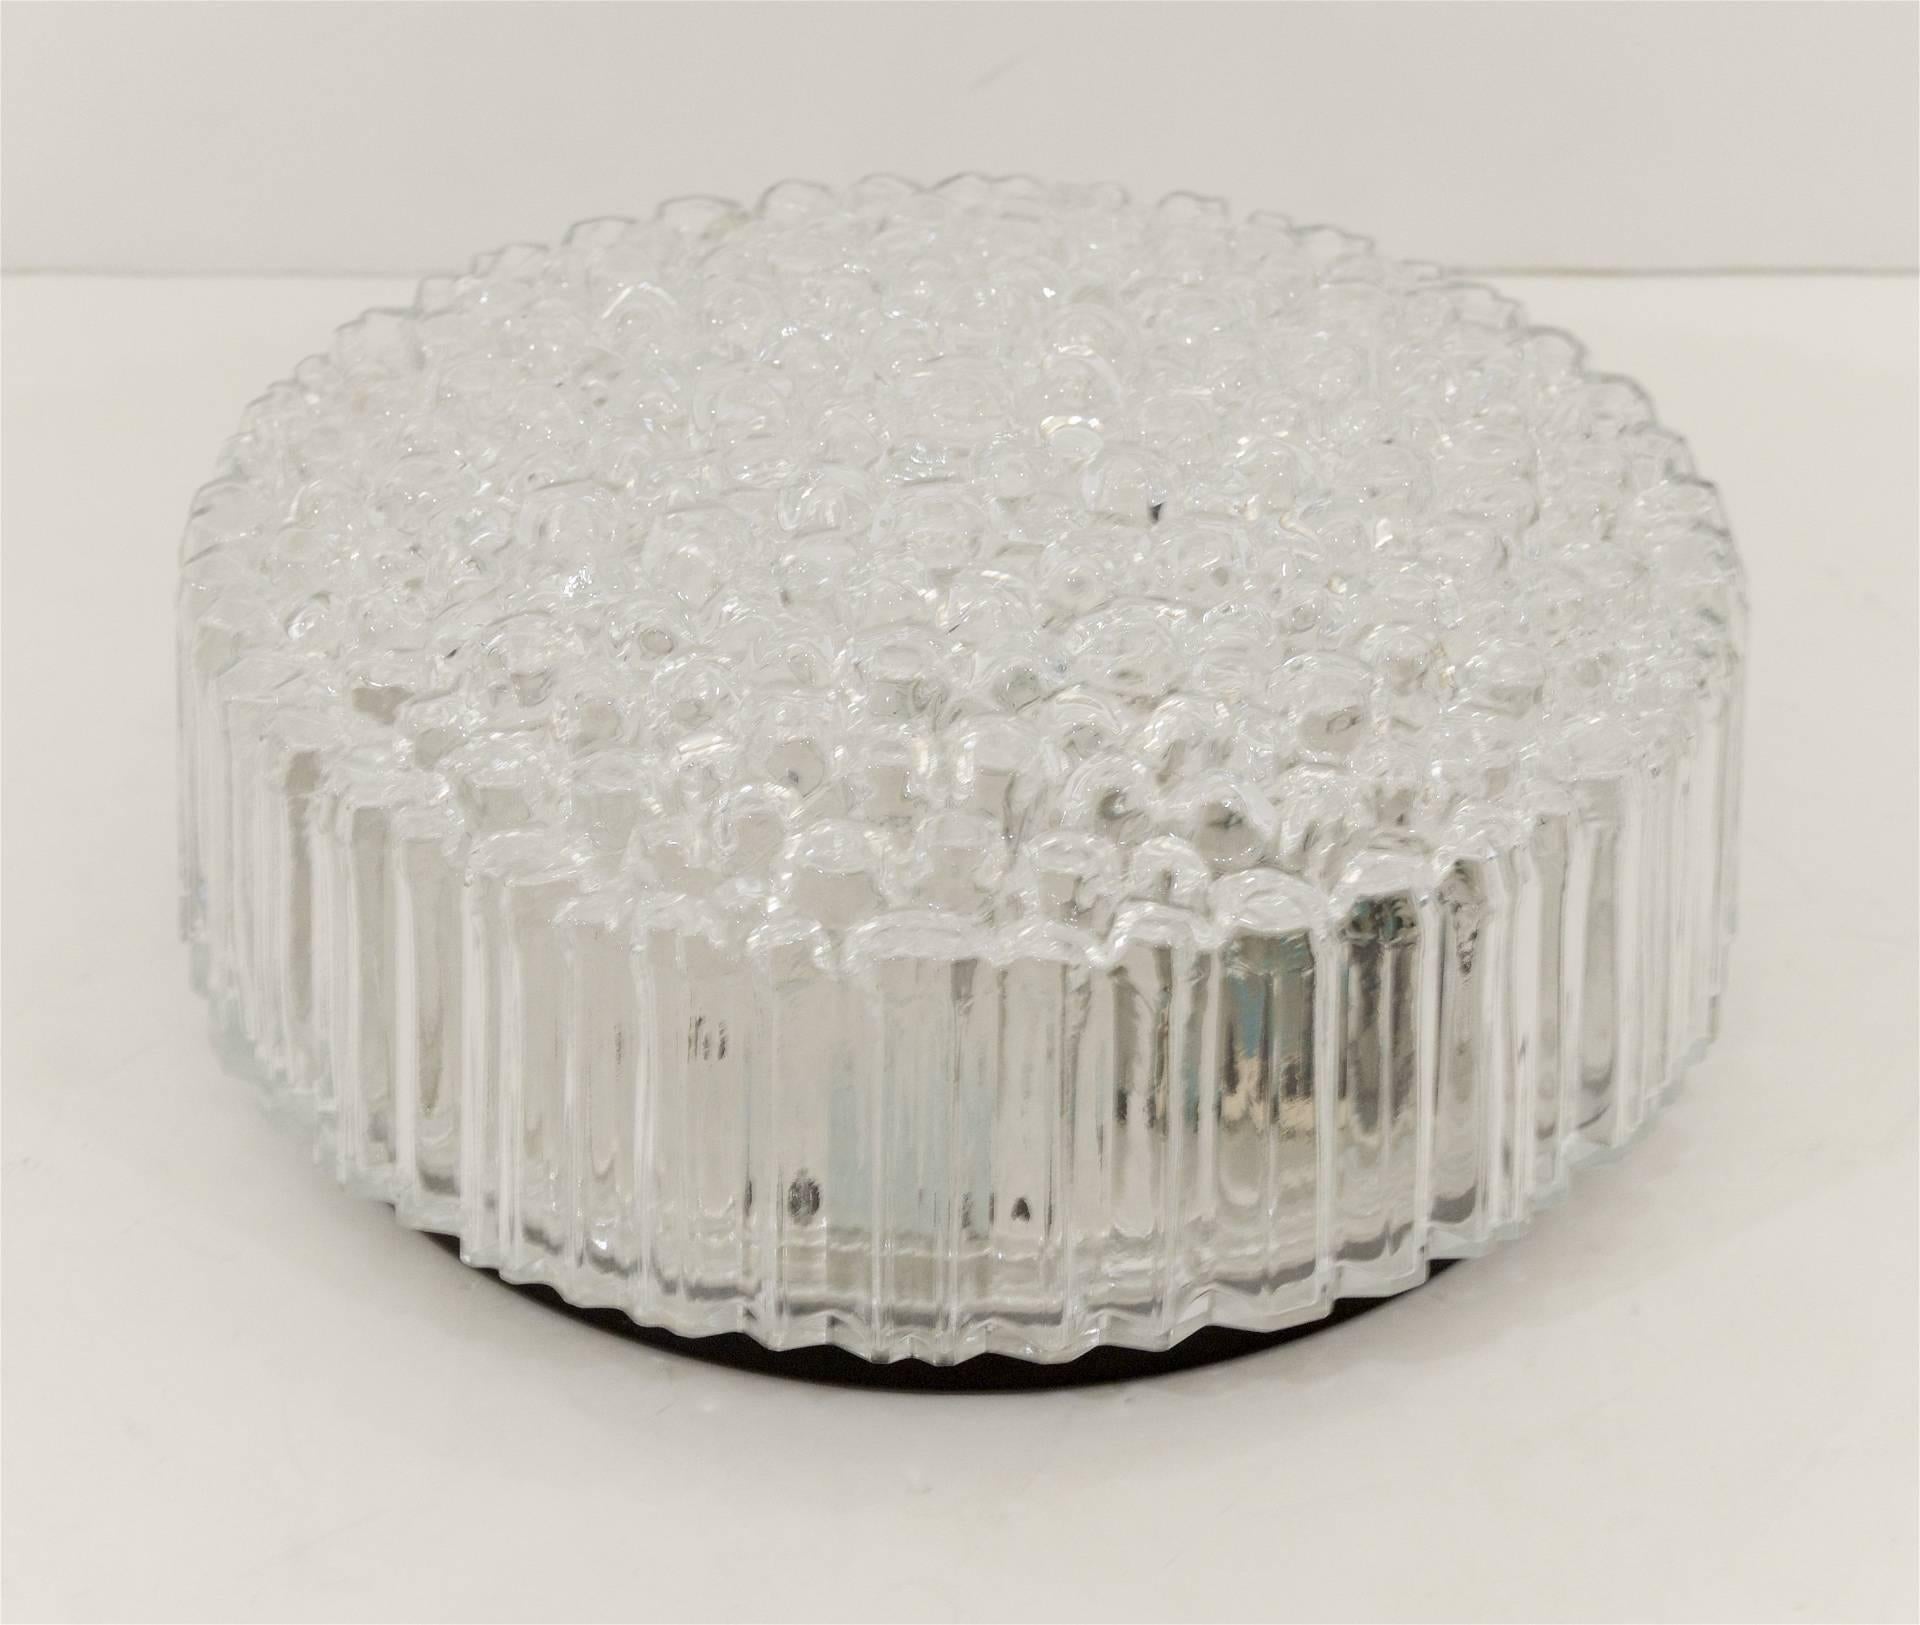 A beautiful glass flush mount with a raised etched glass bubble pattern with singular cuts on the side to create a linear pattern.

Takes one medium base bulb up to 60 watts, new wiring.